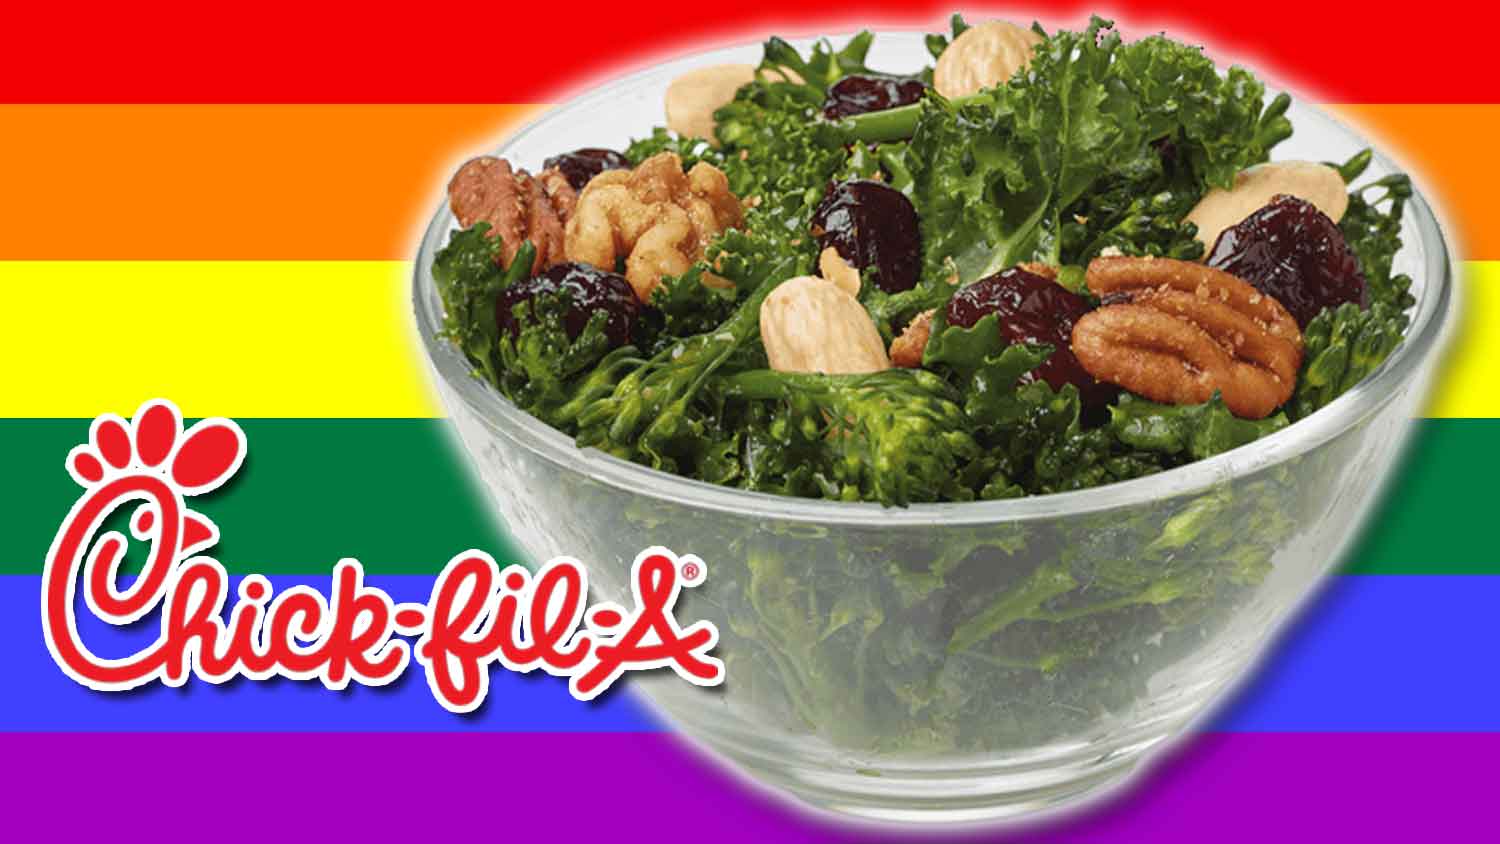 Chick-Fil-A Launches New Vegan Option...But